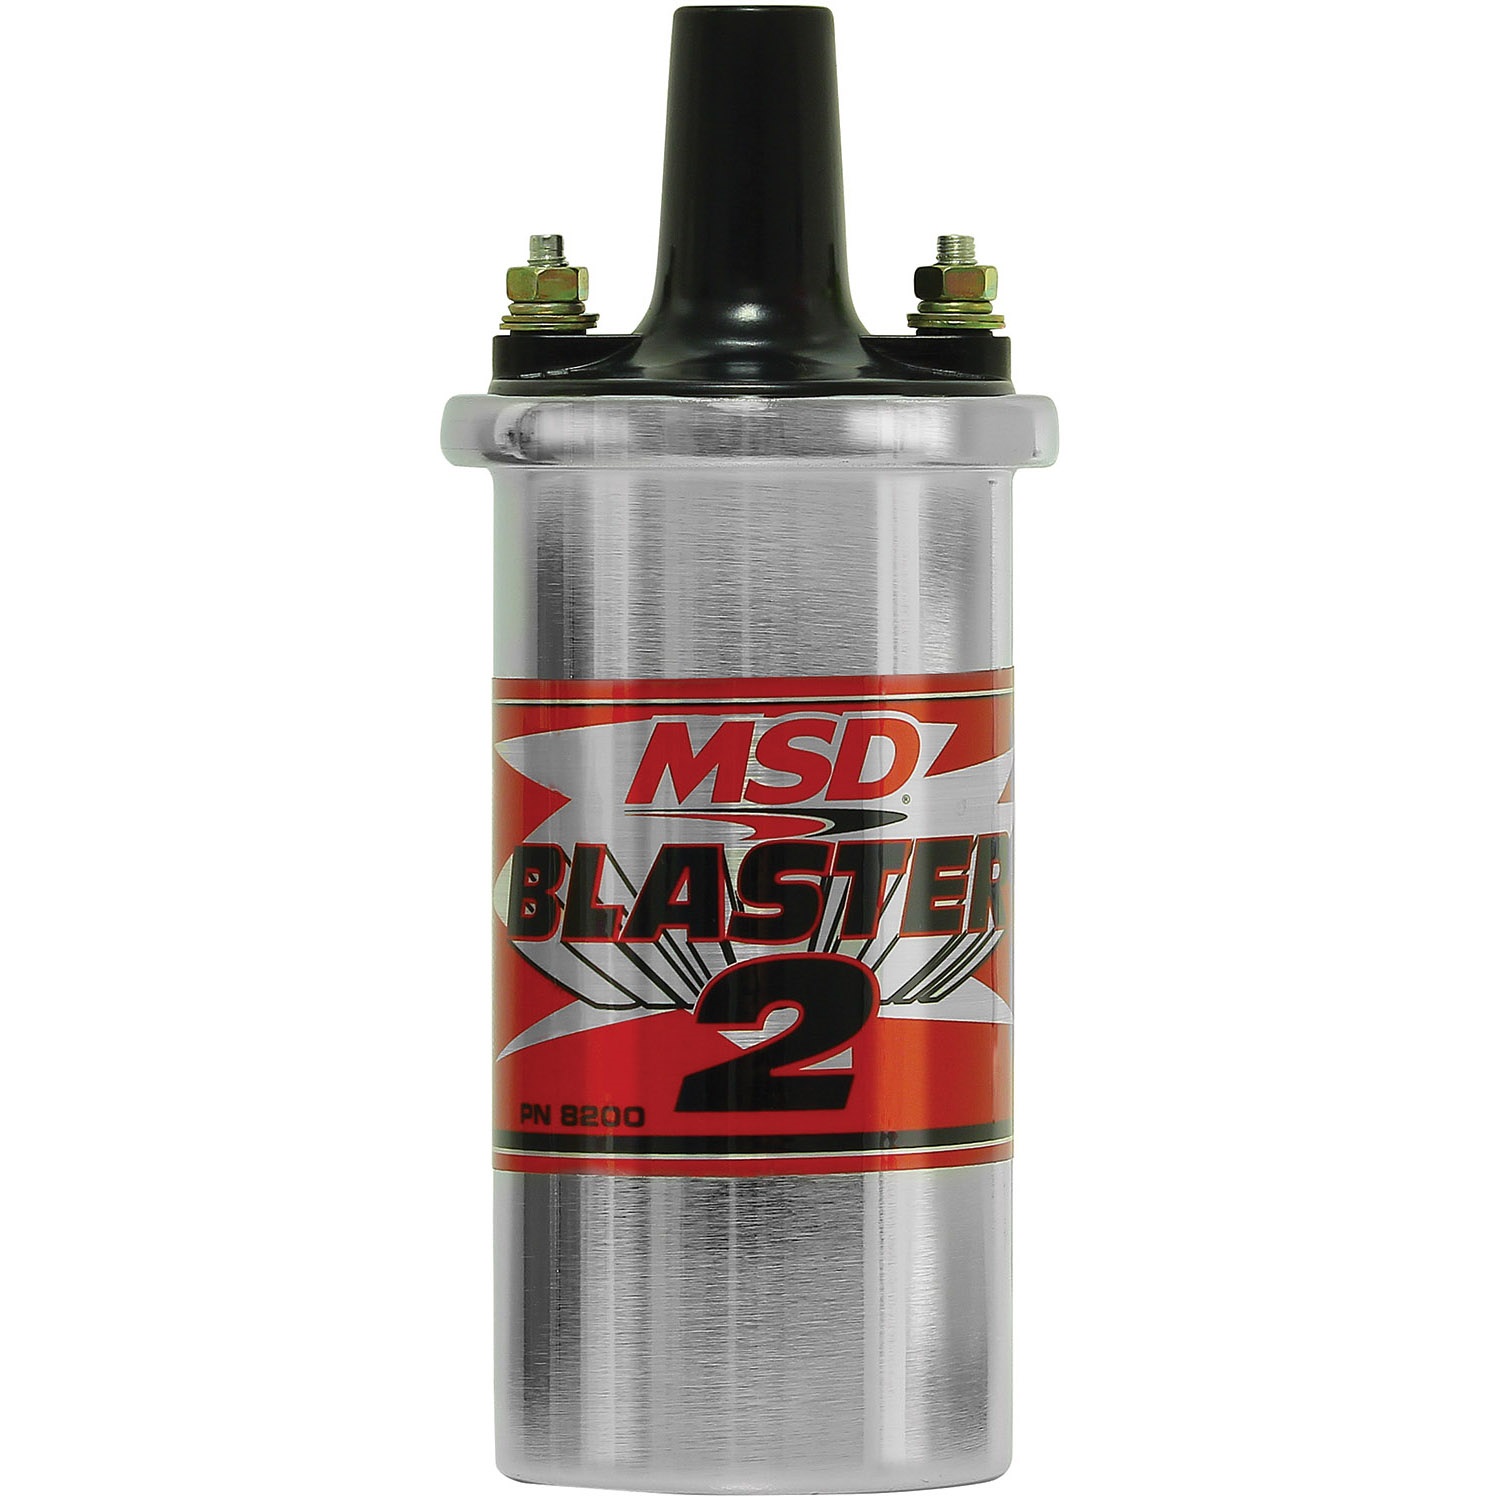 MSD Ignition MSD Ignition 8200 Coil Blaster 2 65-70 Electra Sportwagon